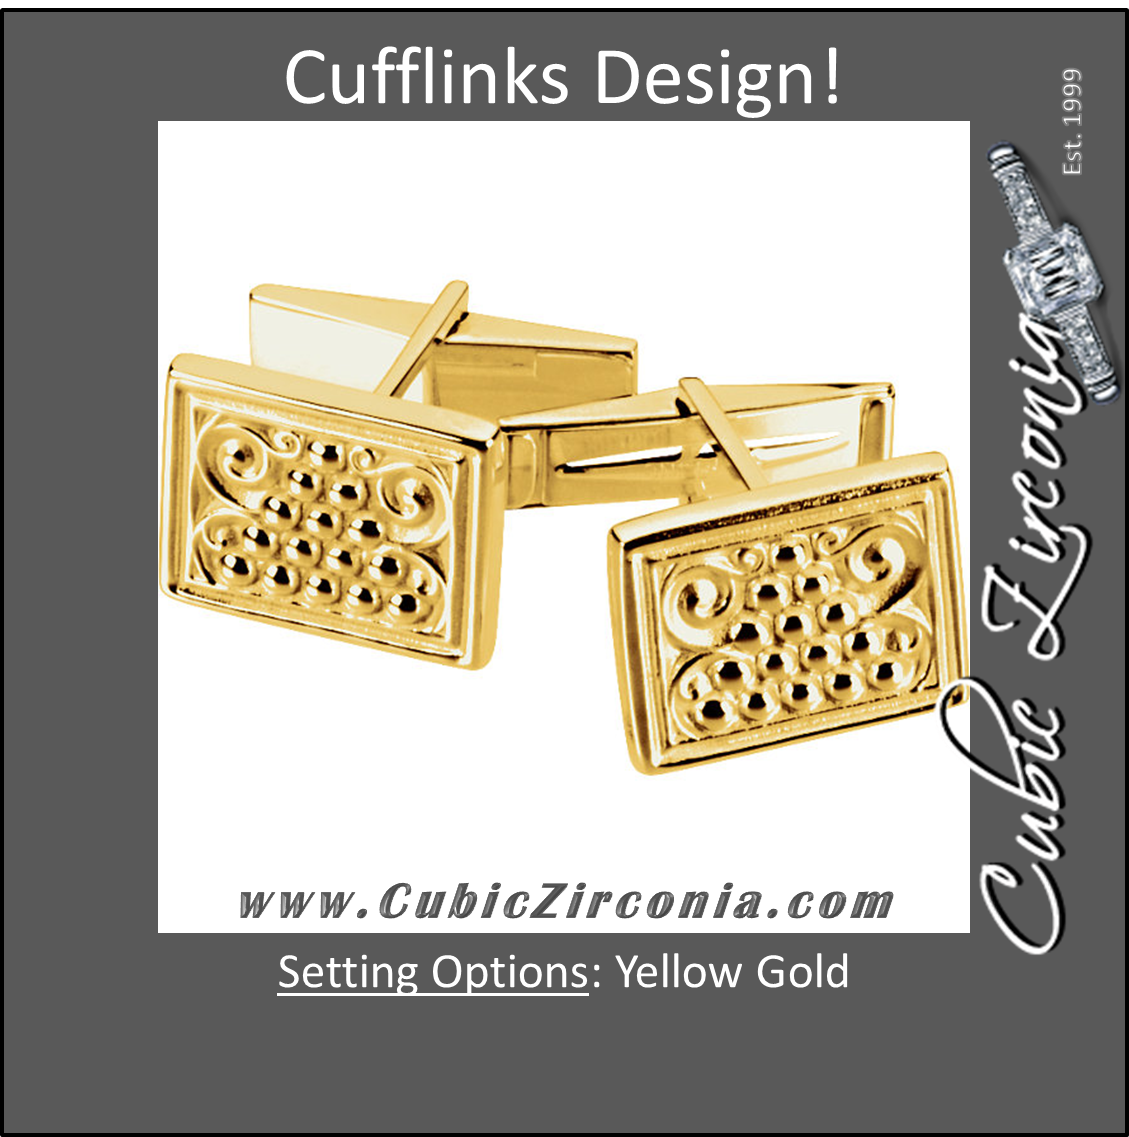 Men’s Cufflinks- Yellow Gold Rugged Style Rectangular Design with Hand-Engraving